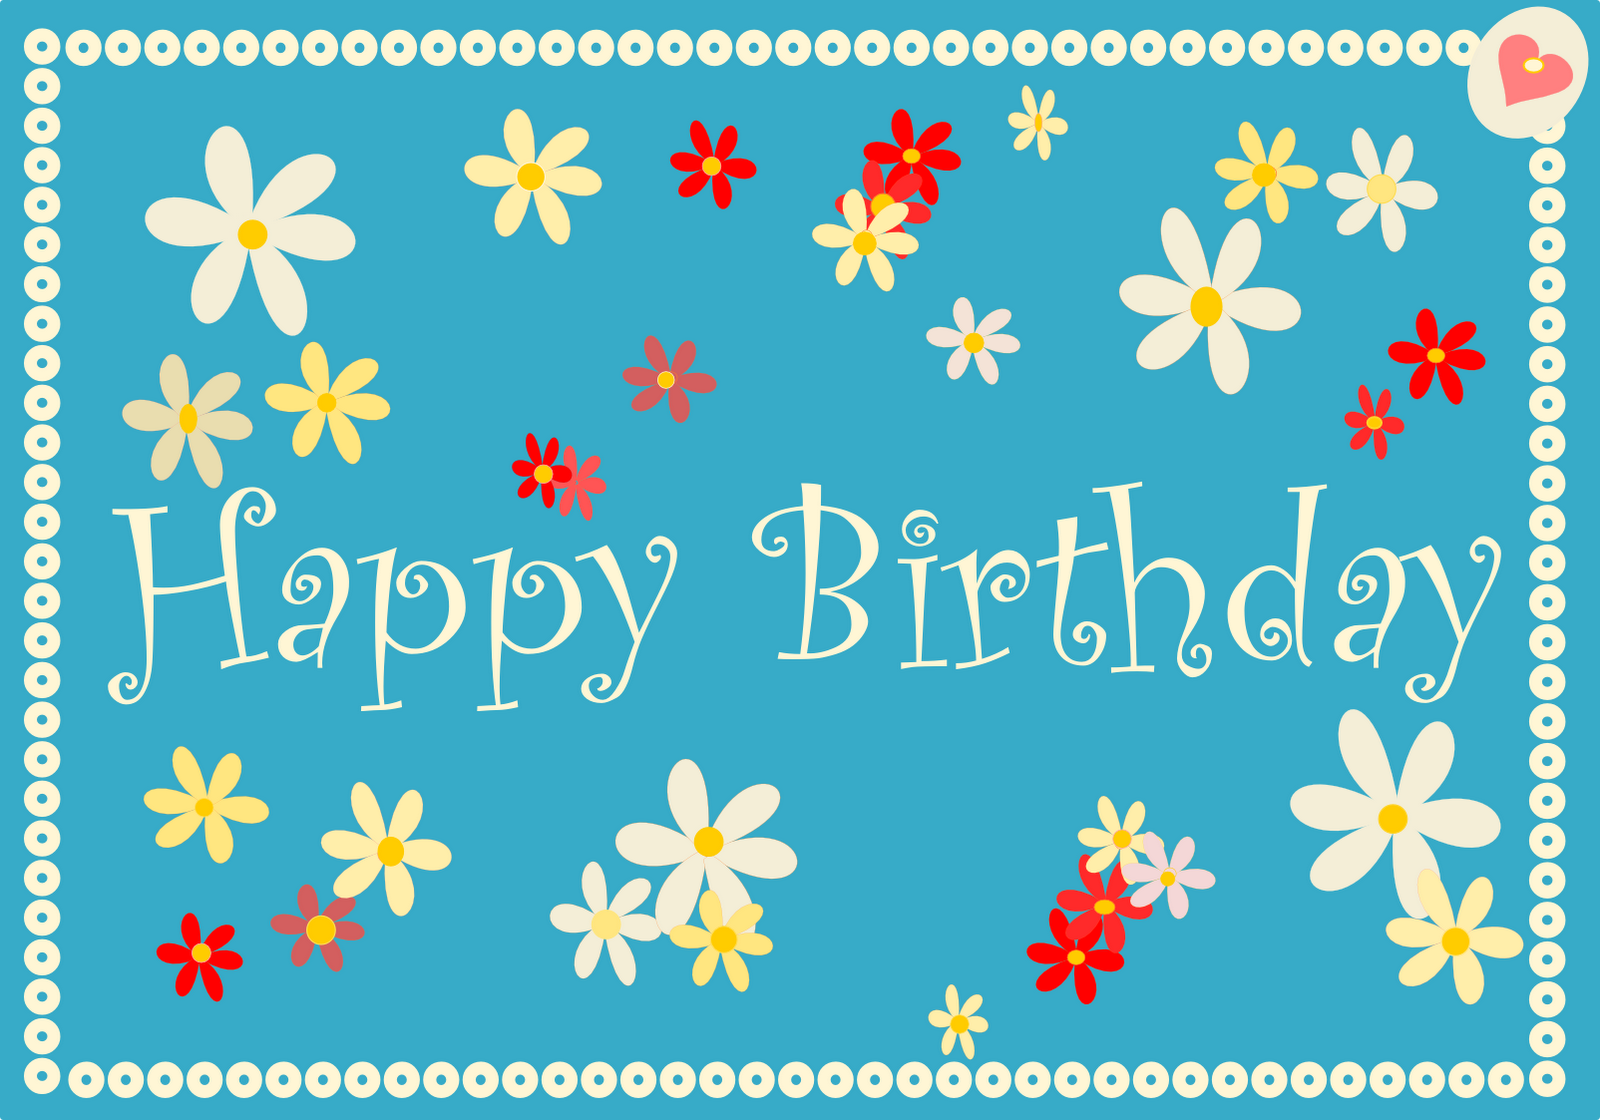 ready for print happy birthday card design with vector image - birthday ...